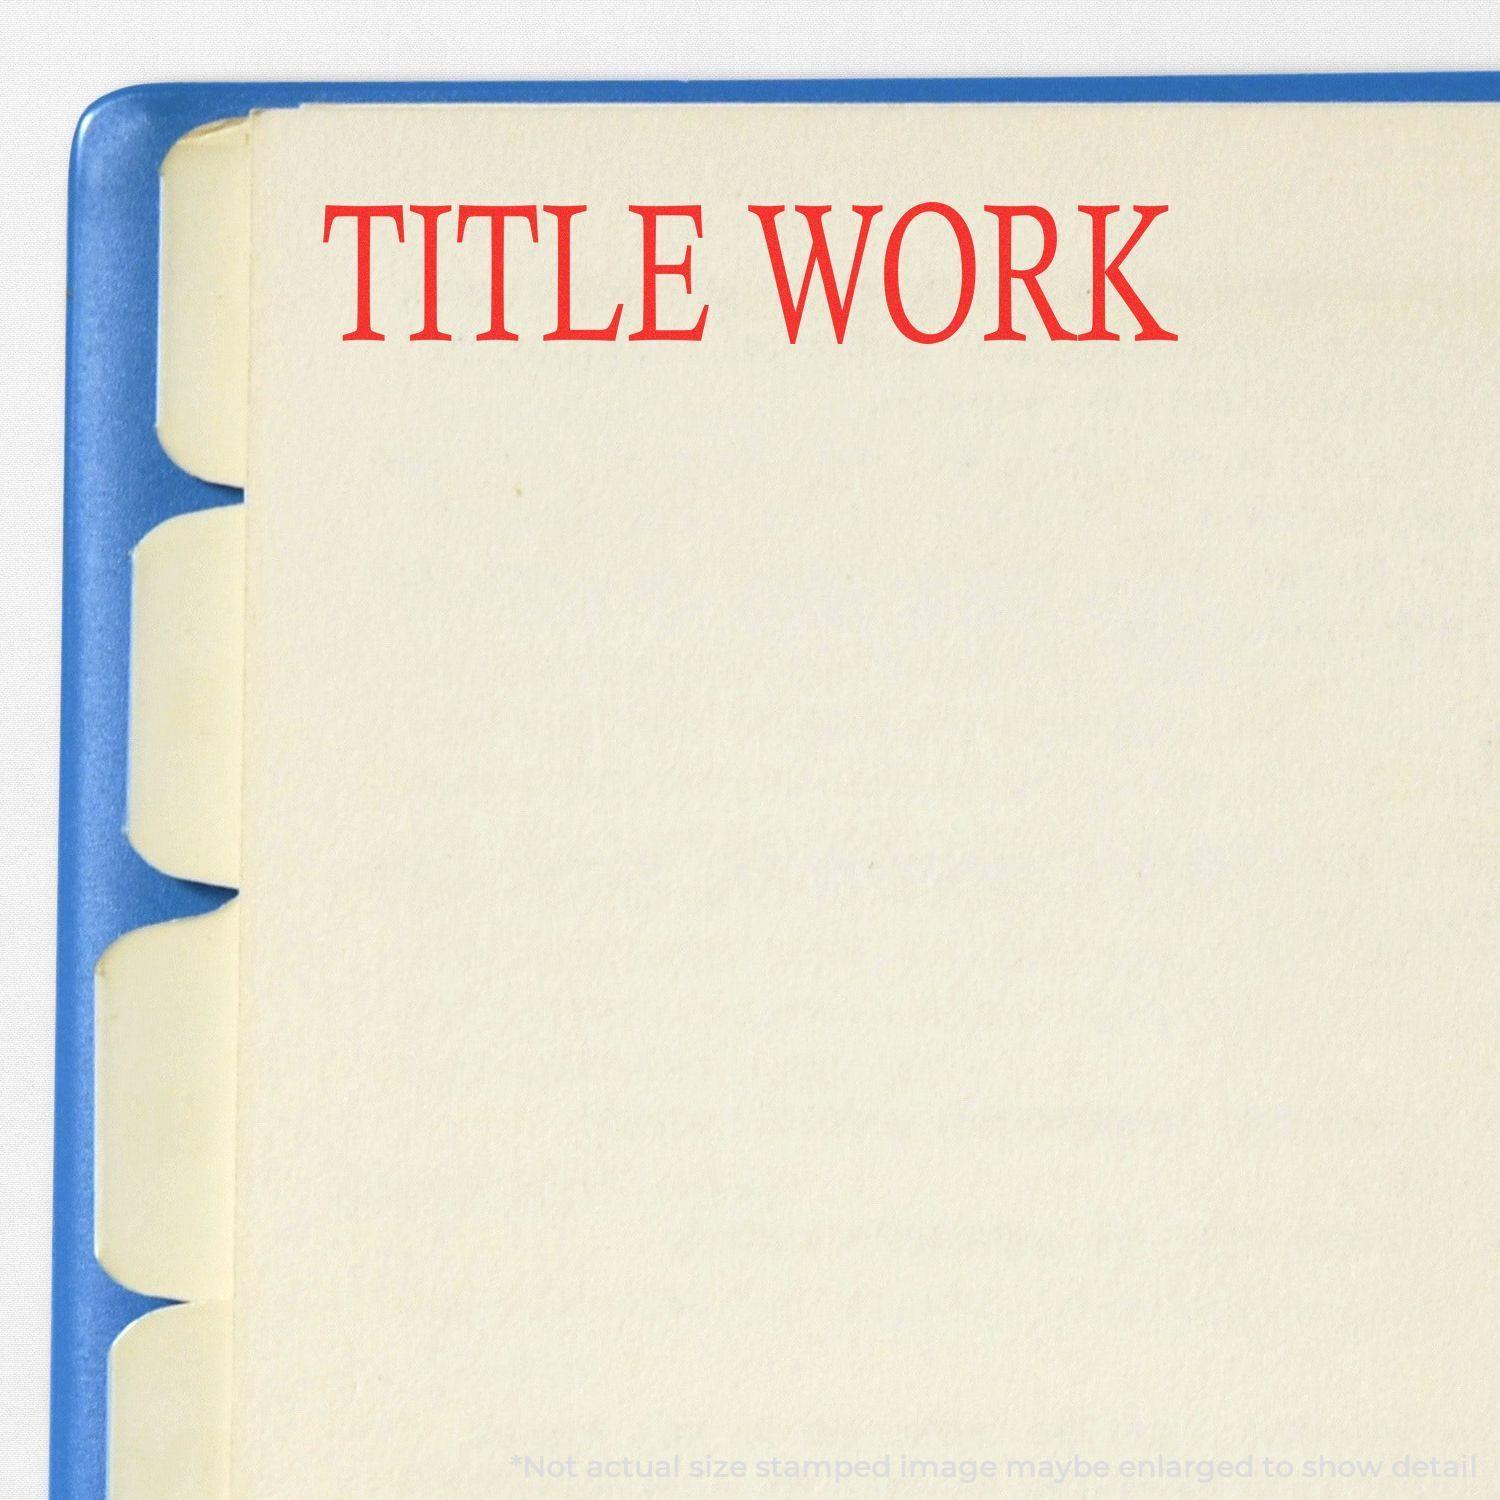 A stock office rubber stamp with a stamped image showing how the text "TITLE WORK" in a large font is displayed after stamping.